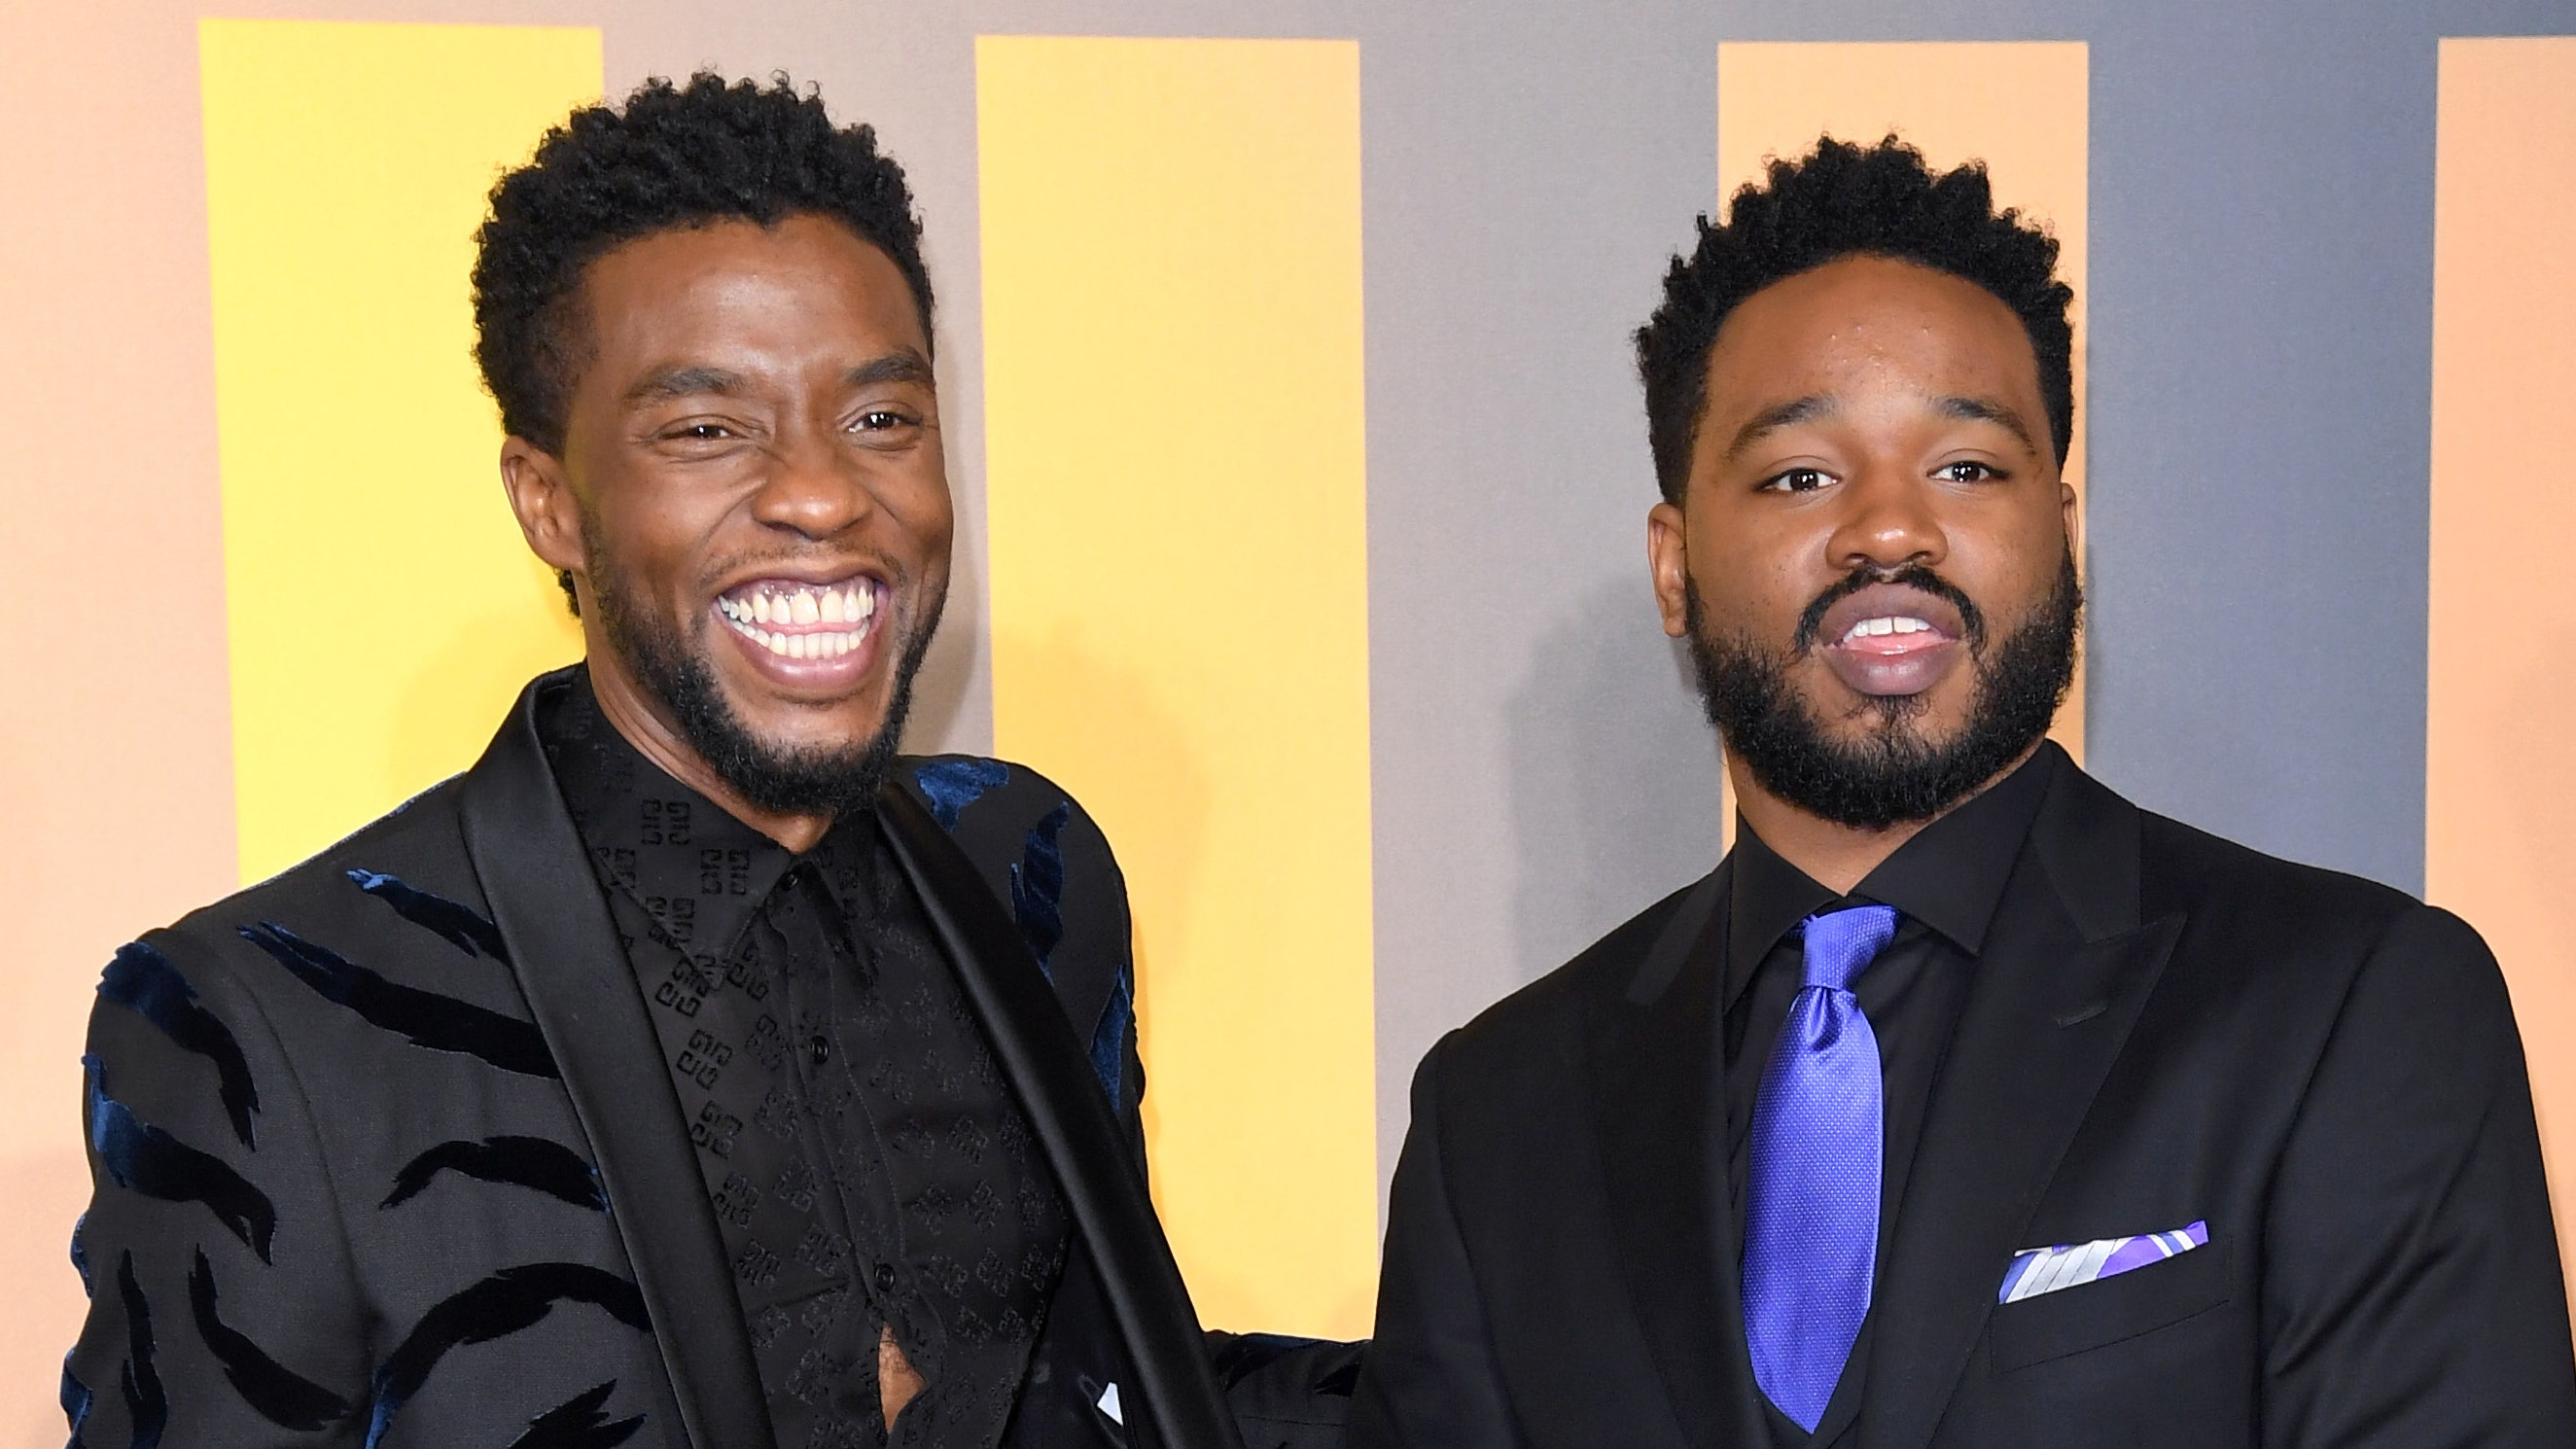 'Black Panther II' will still film in Georgia despite Ryan Coogler's opposition to the state's voting laws